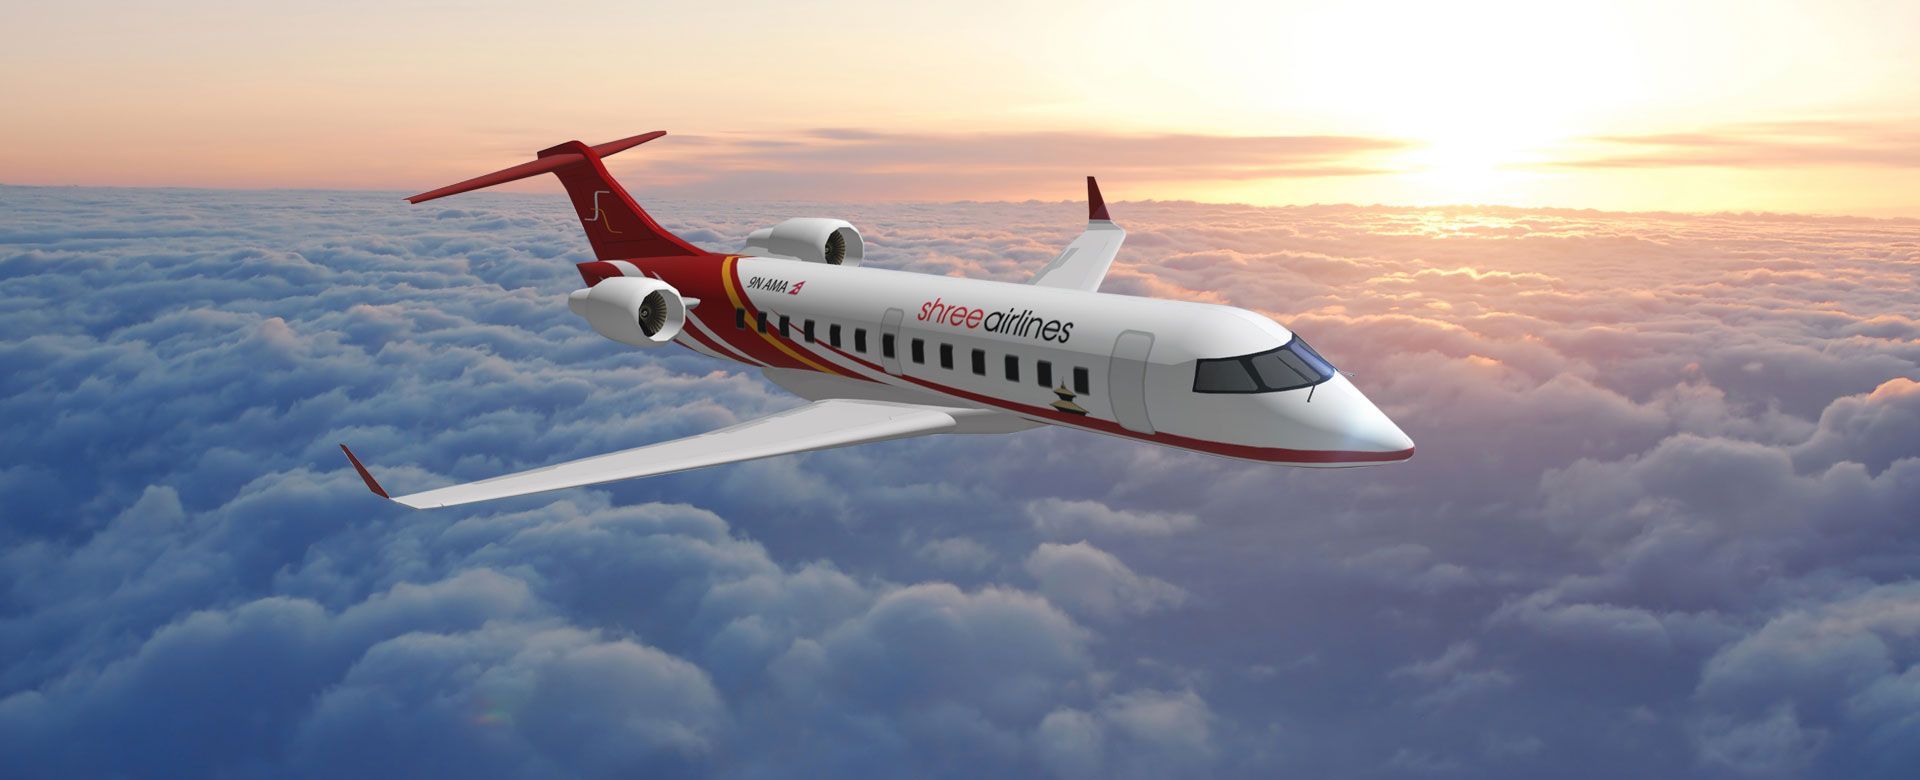 shree-airlines-adds-one-more-aircraft-to-its-fleet